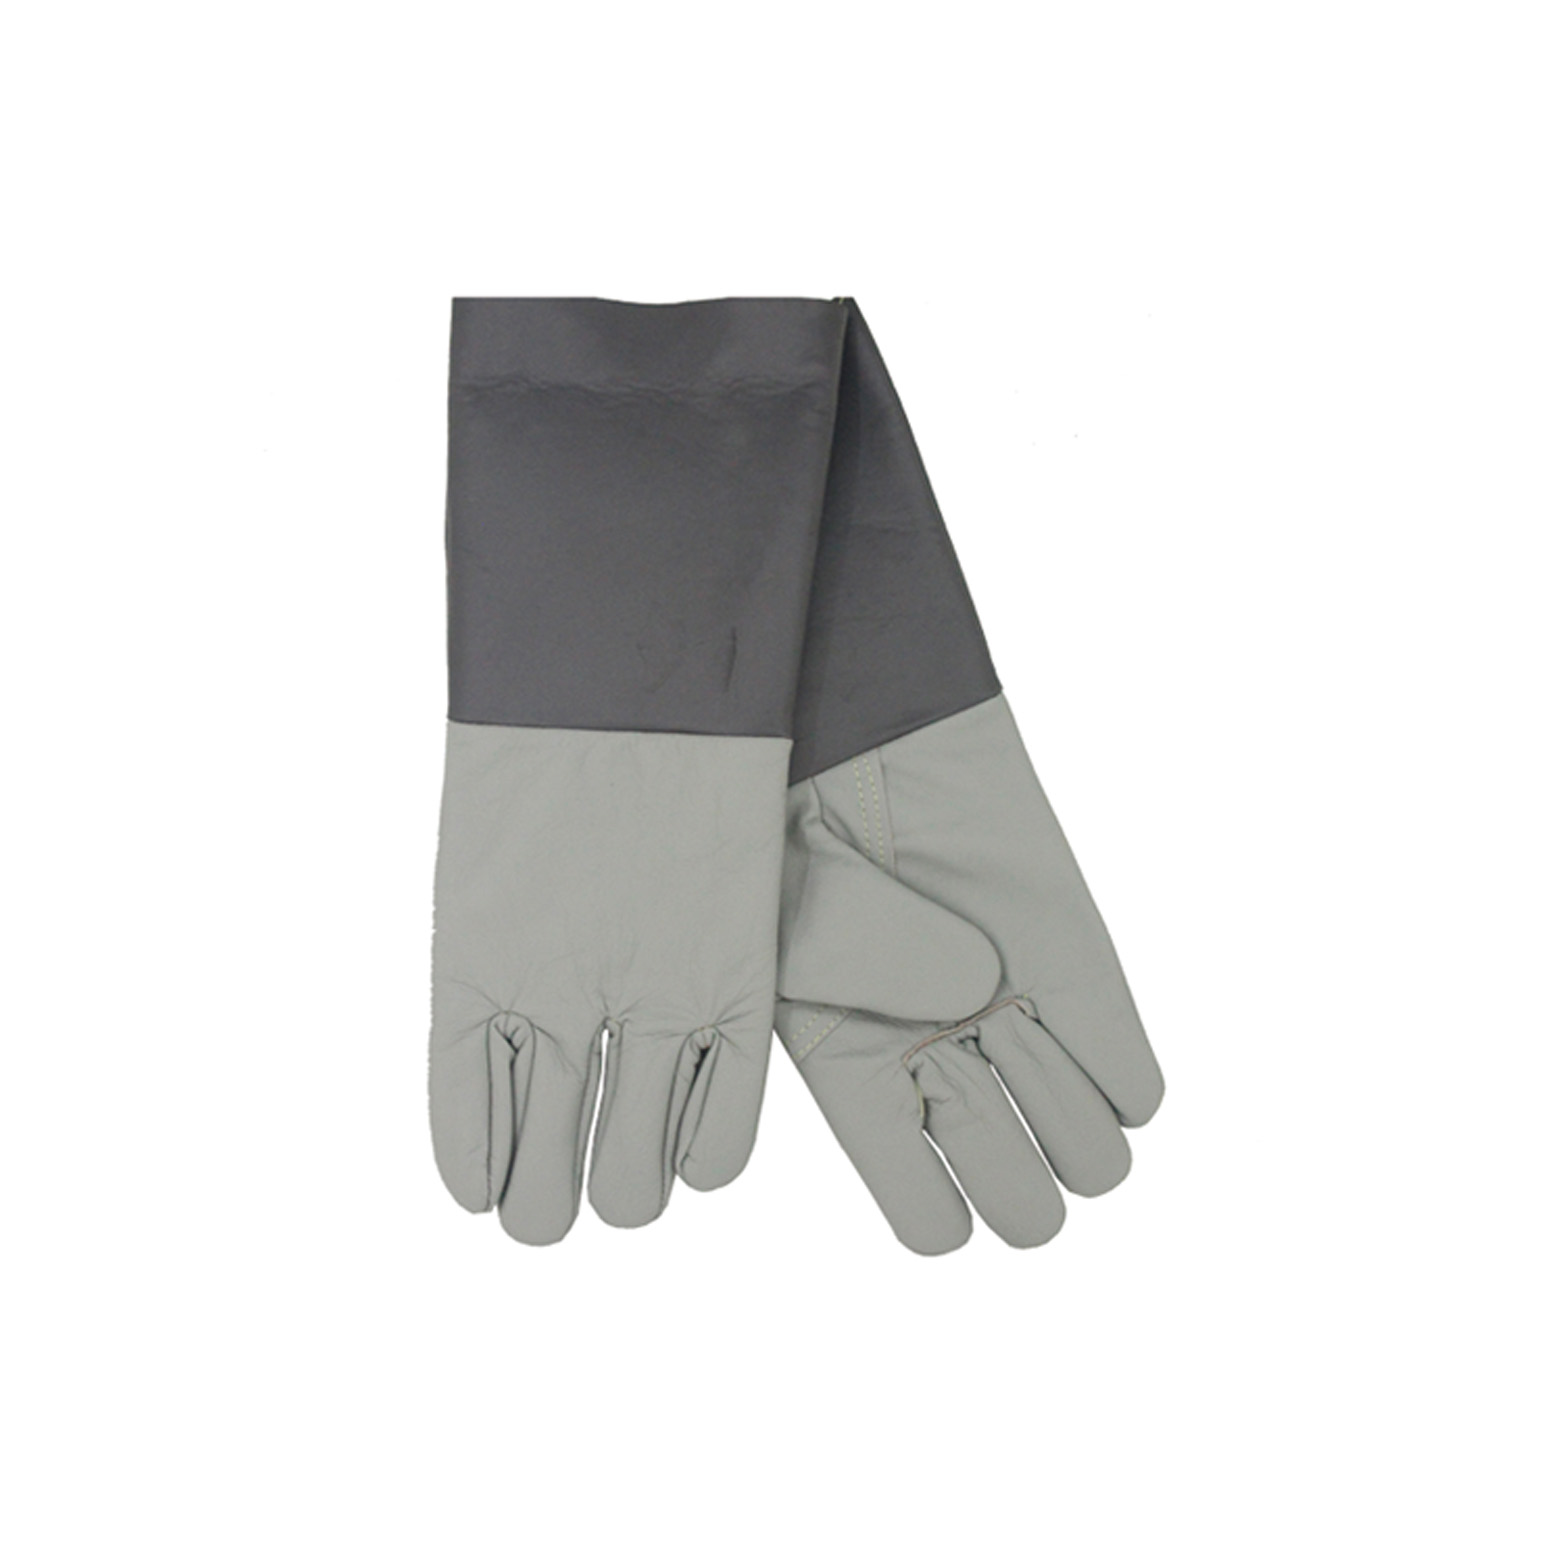 Get Star Weld Double colors genuine leather gloves